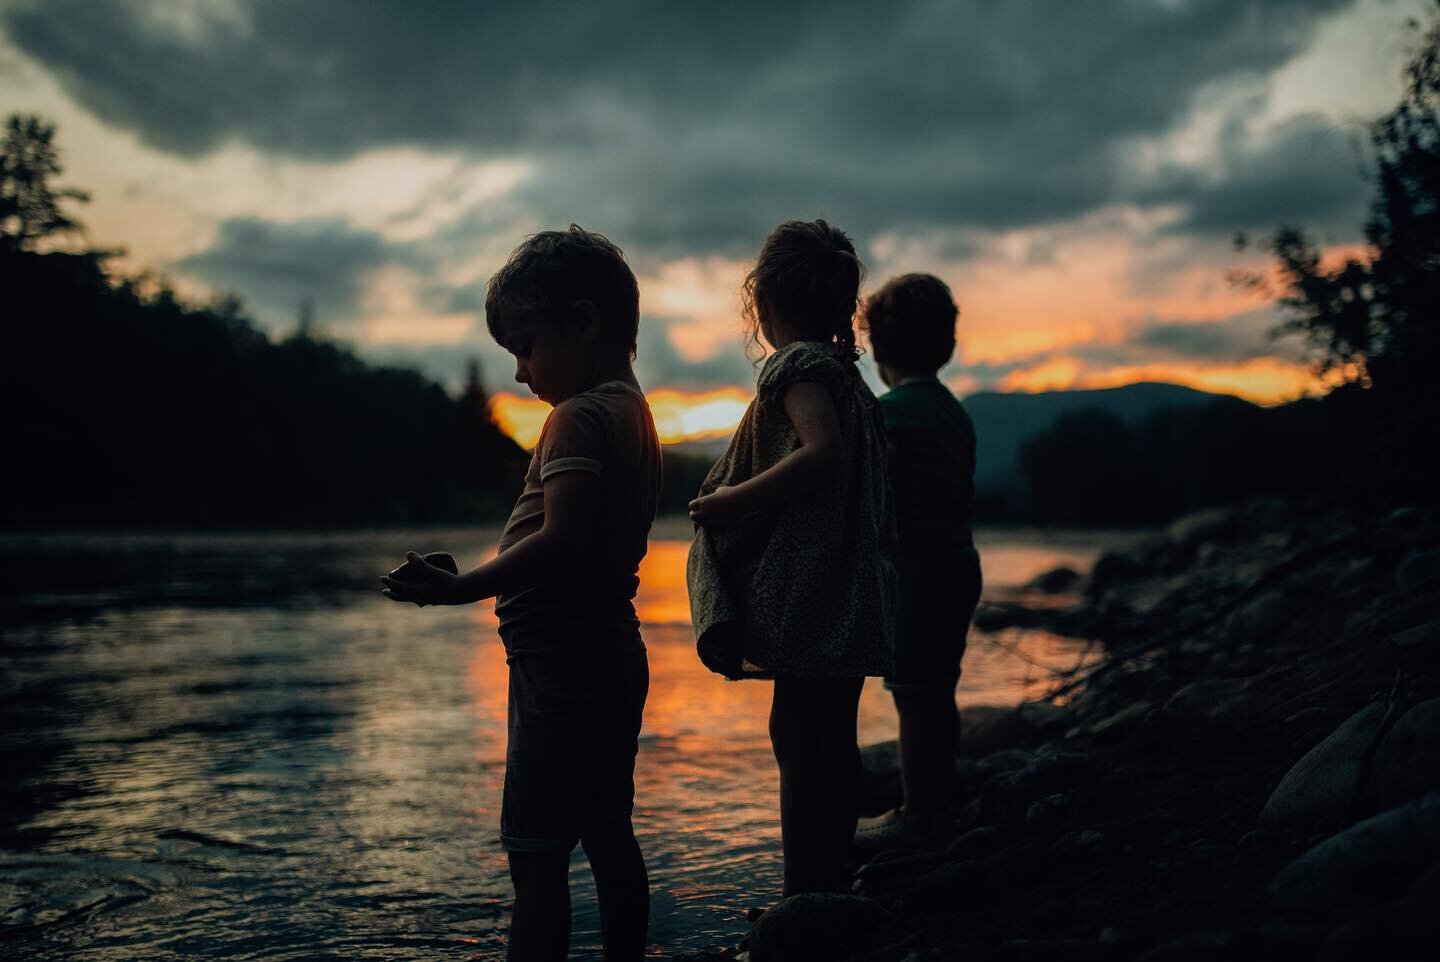 For all you parents of toddlers (generally, I understand Neurodivergence plays a big role in this as well) wondering when camping is going to &quot;get better.&quot; ⁣
⁣
When you'll stop having to waste your much needed kid free campfire time getting